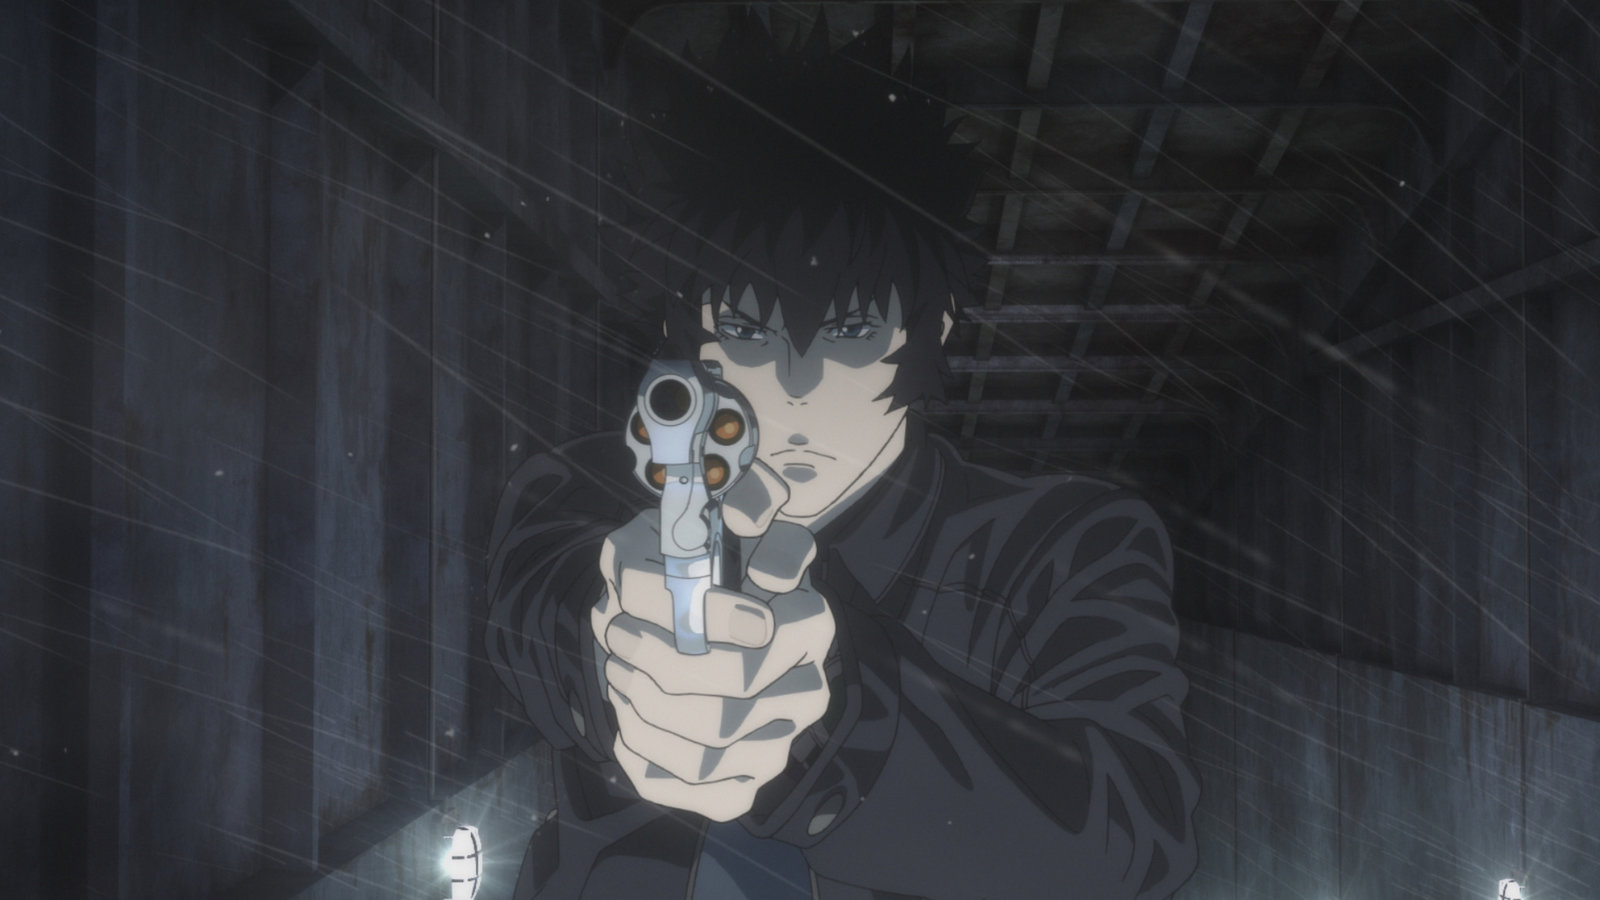 Psycho-Pass: Providence (Movie) (Limited Edition)  (Blu-ray Disc)